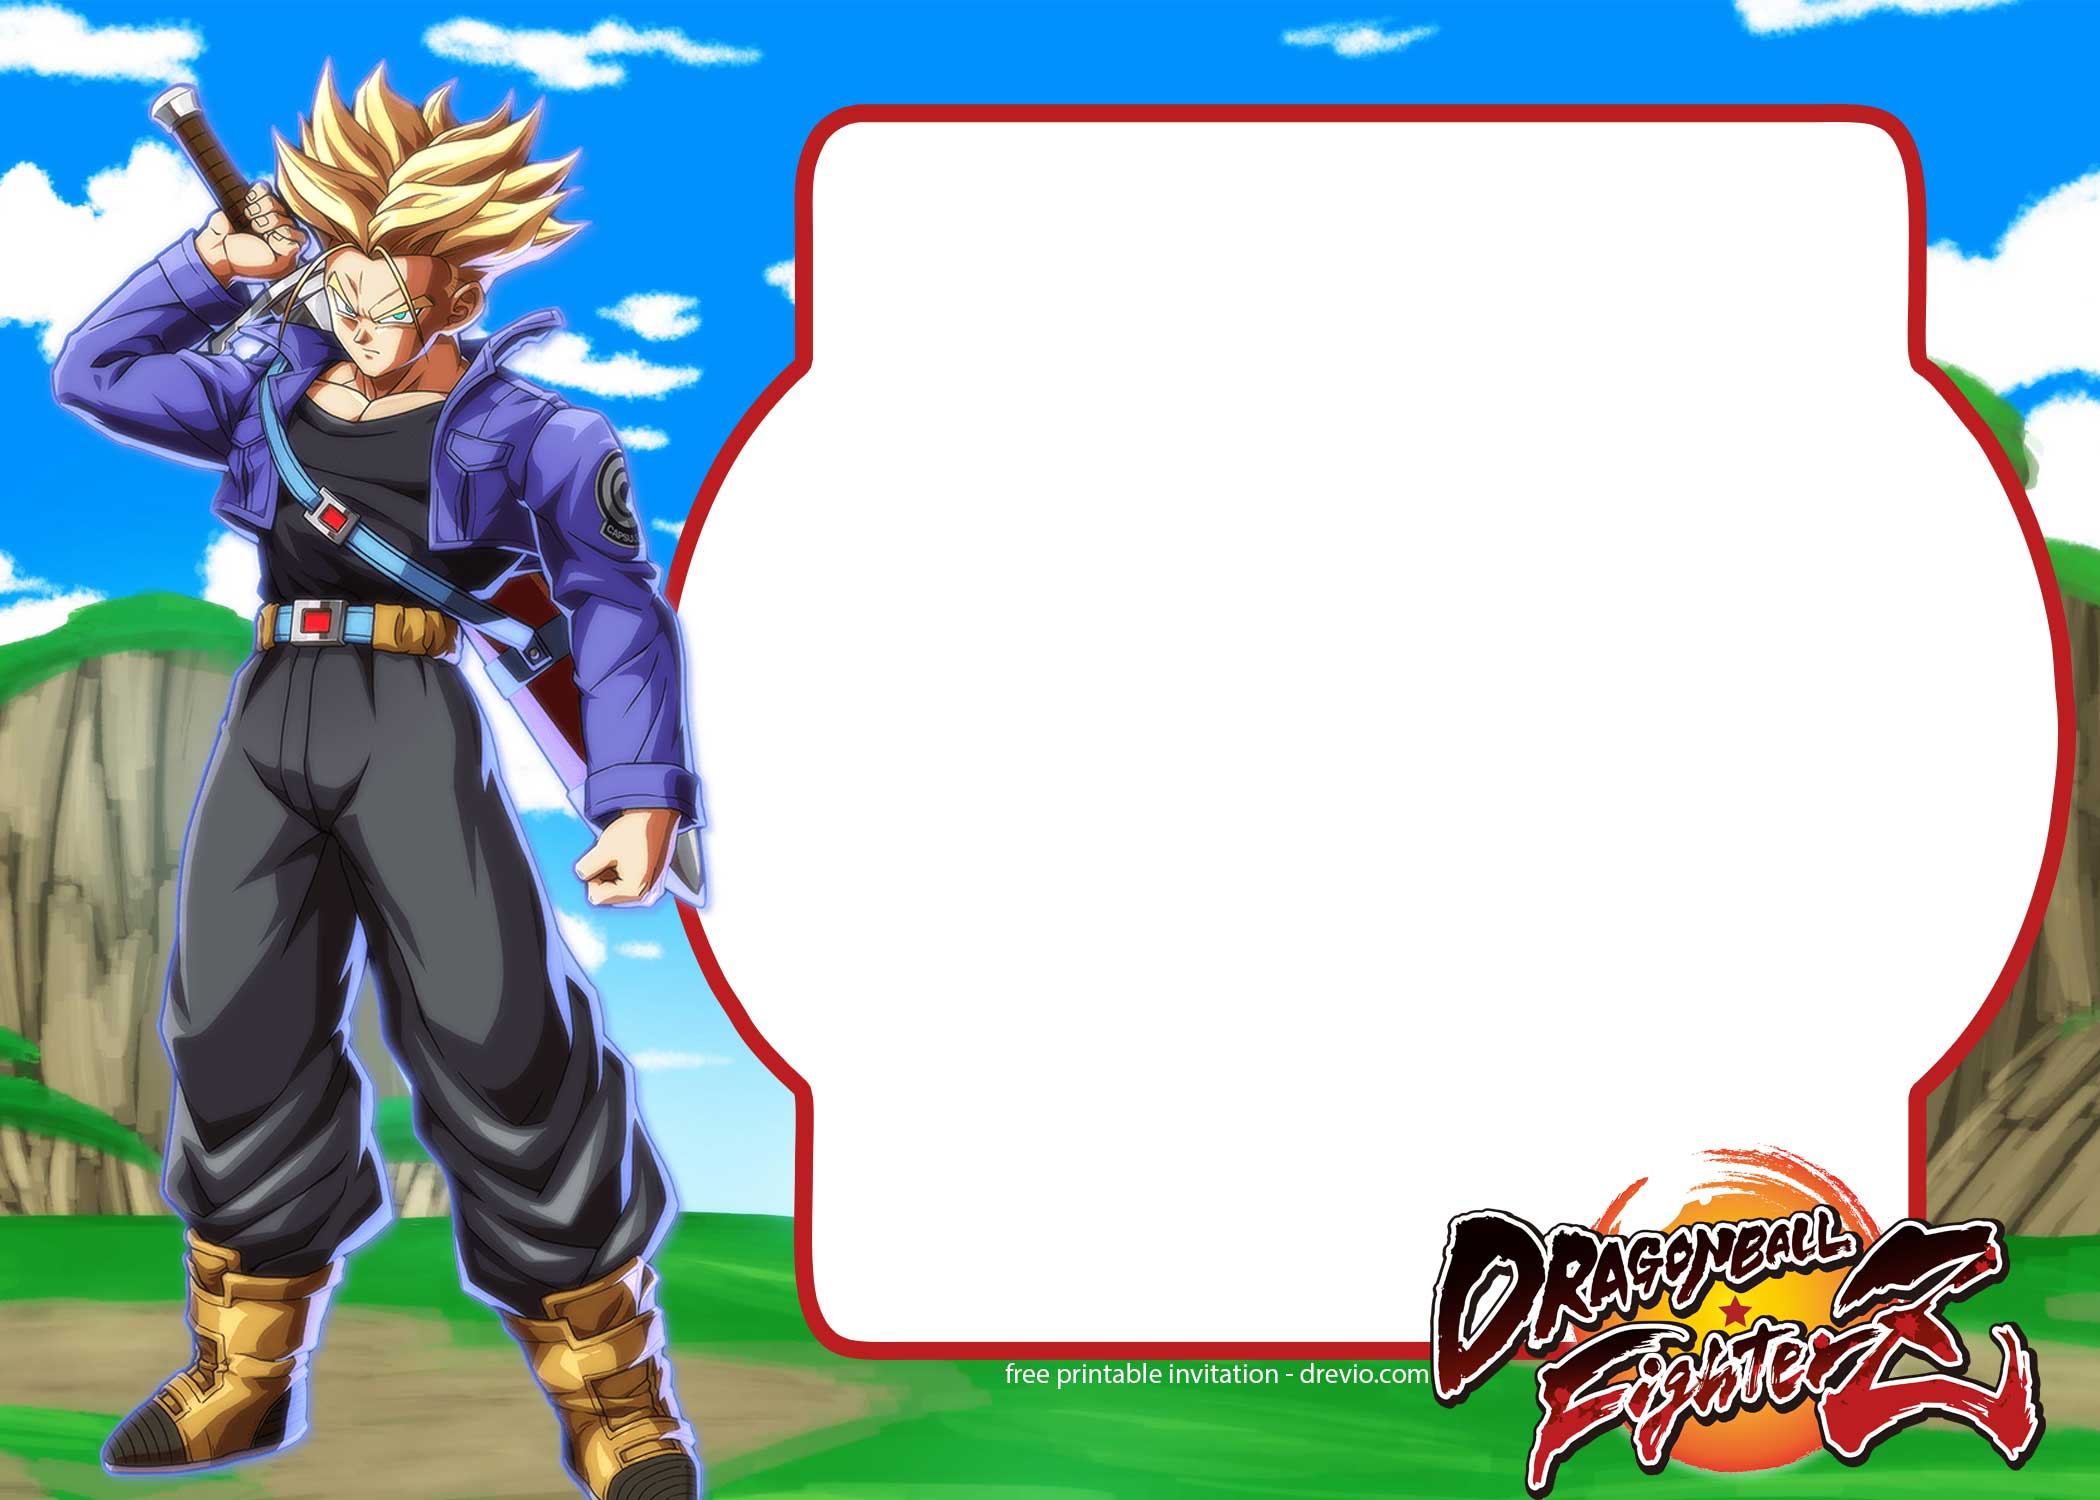 How to Download Dragon Ball Fighter Z invitation template? 